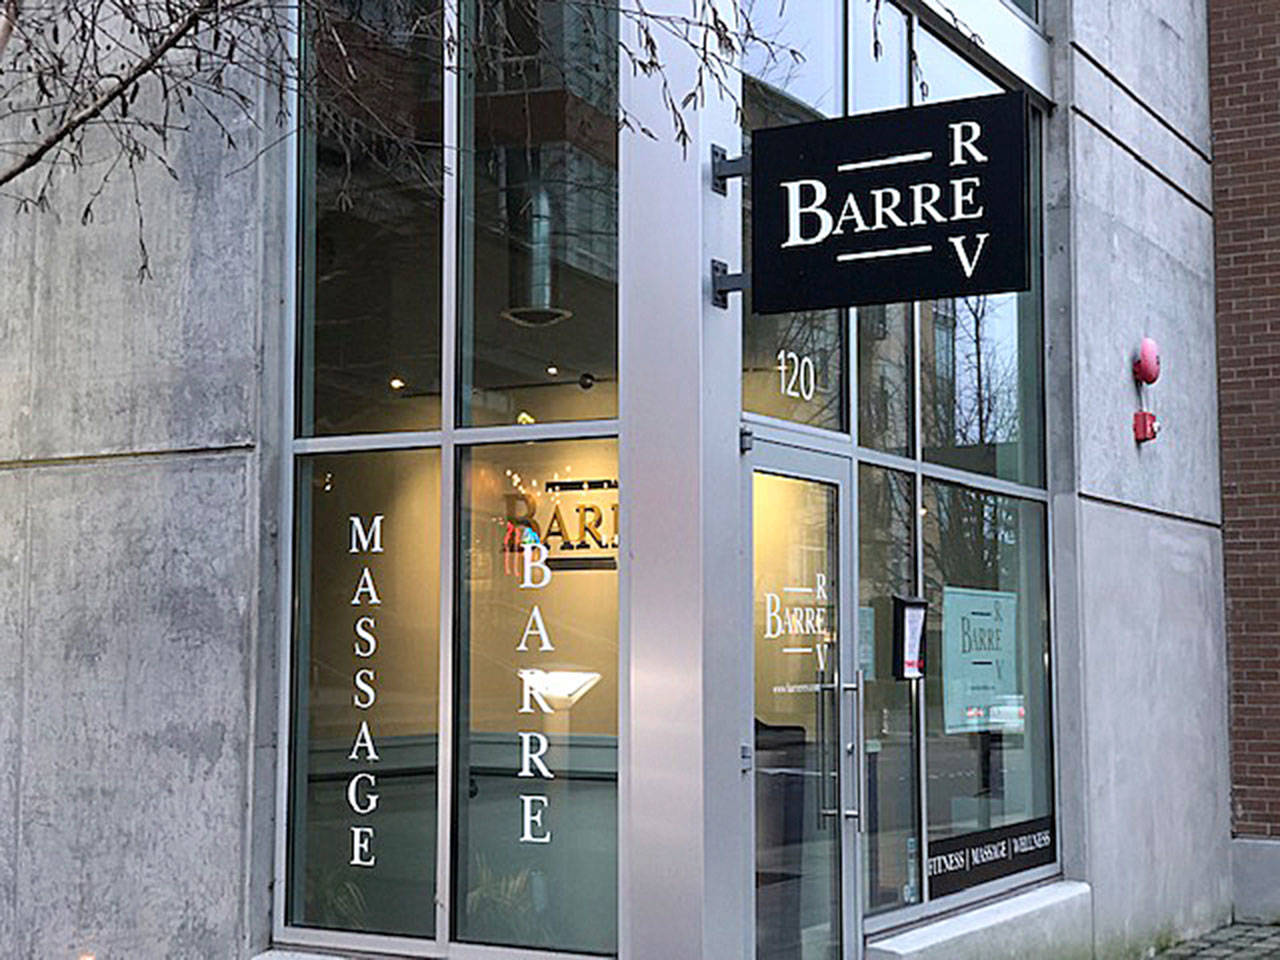 The Barre Rev studio took over a location that was previously occupied by The Dailey Method, a franchise fitness studio. Kaelyn Adams, owner of Barre Rev, had only two weeks to convert the space to her own studio. Photo courtesy of Kaelyn Adams